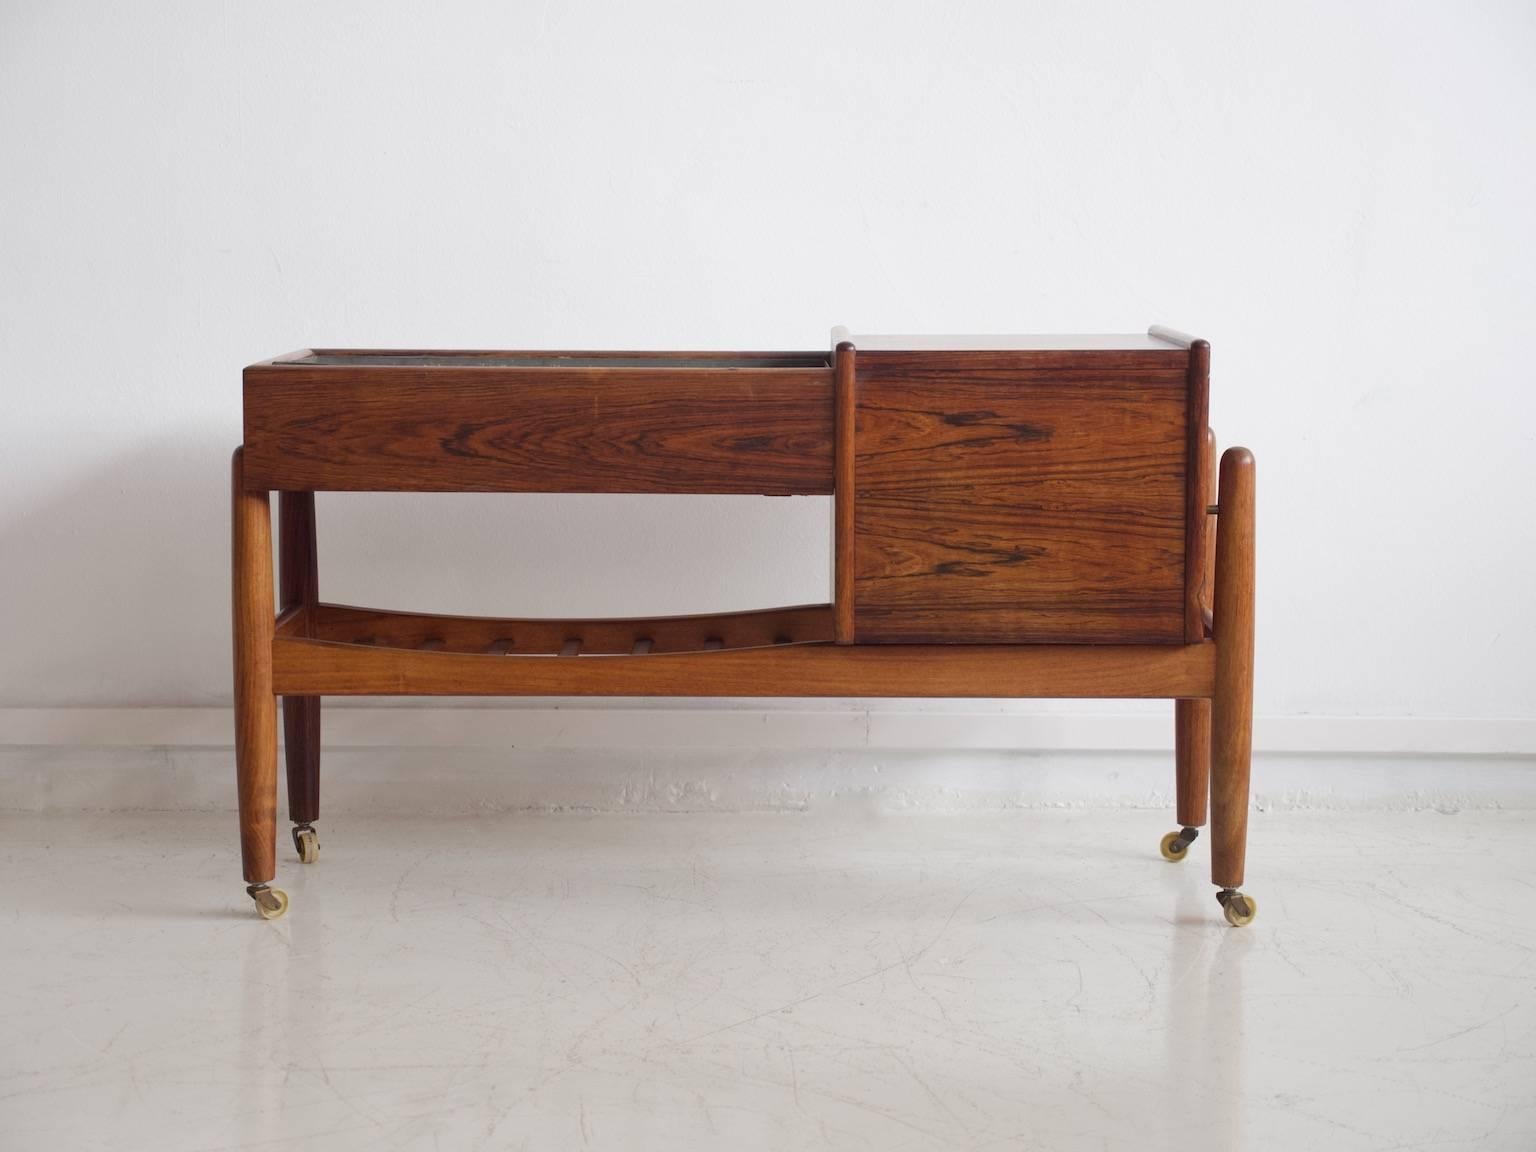 20th Century Arne Wahl Iversen Console with a Planter and Three Drawers